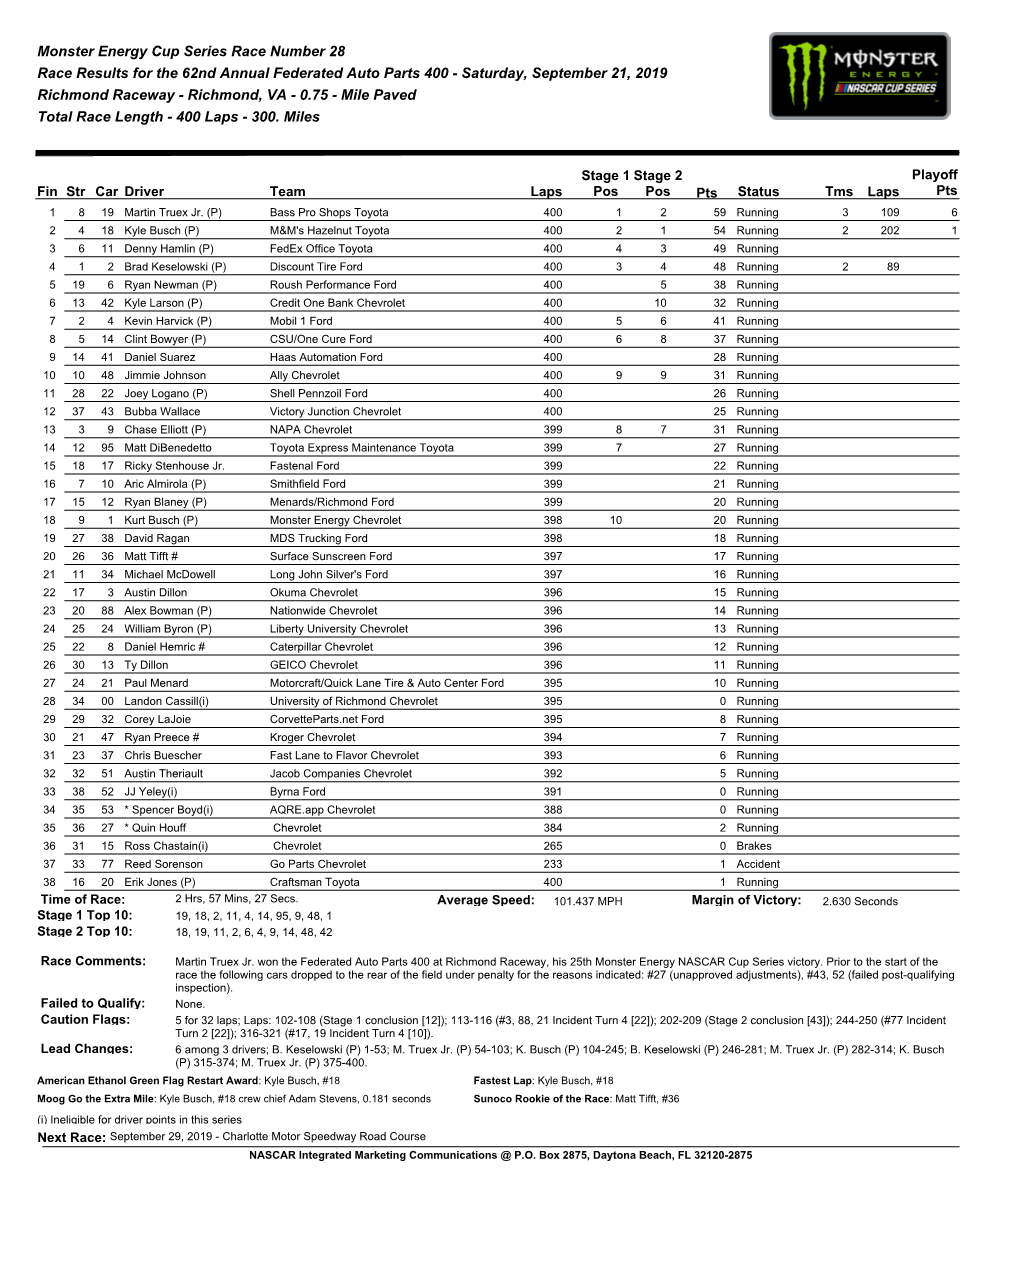 Monster Energy Cup Series Race Number 28 Race Results for The